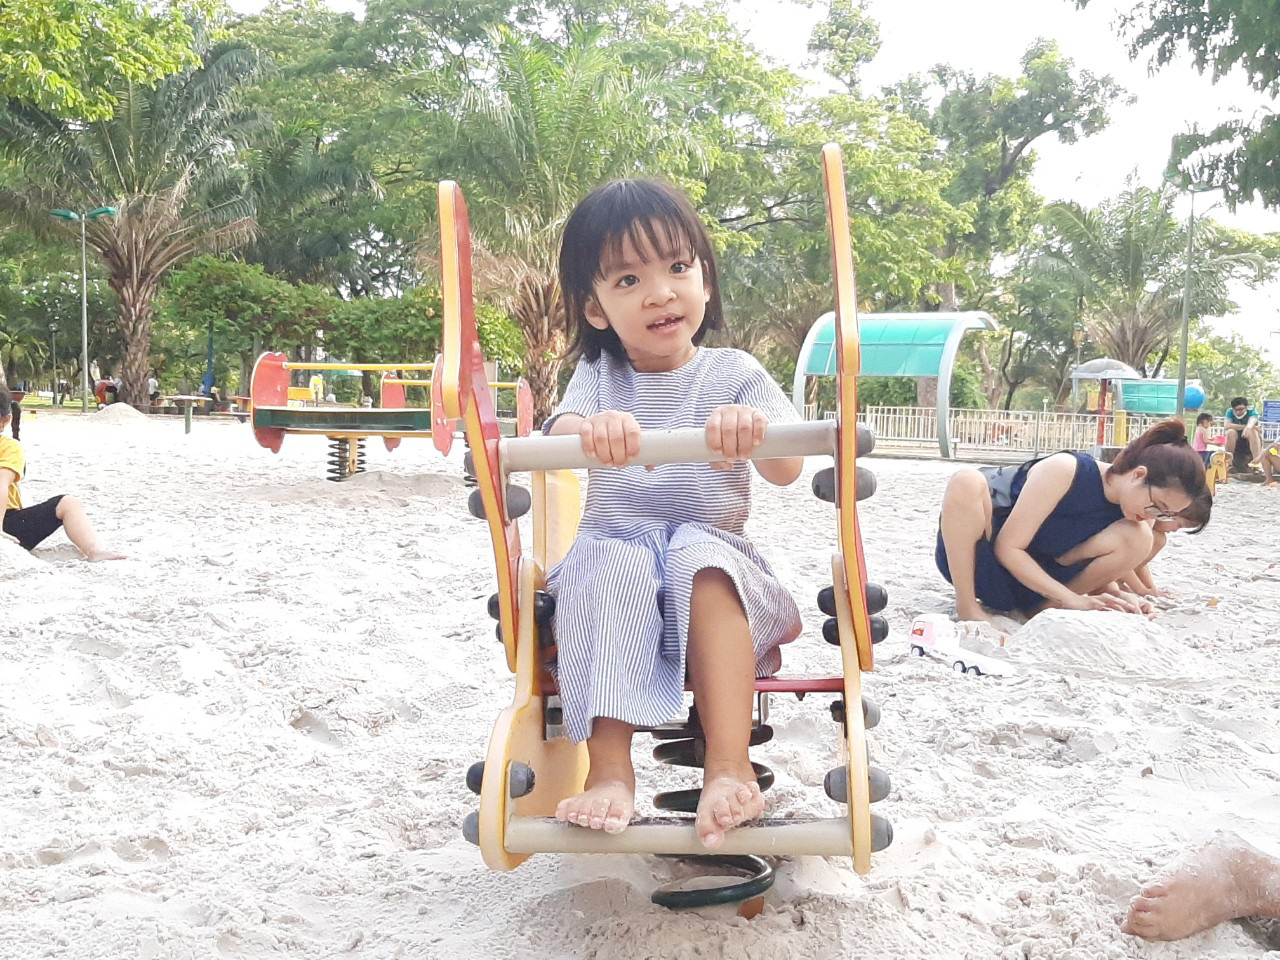 Ho Chi Minh City closes children’s playgrounds, sporting areas for stricter COVID-19 prevention